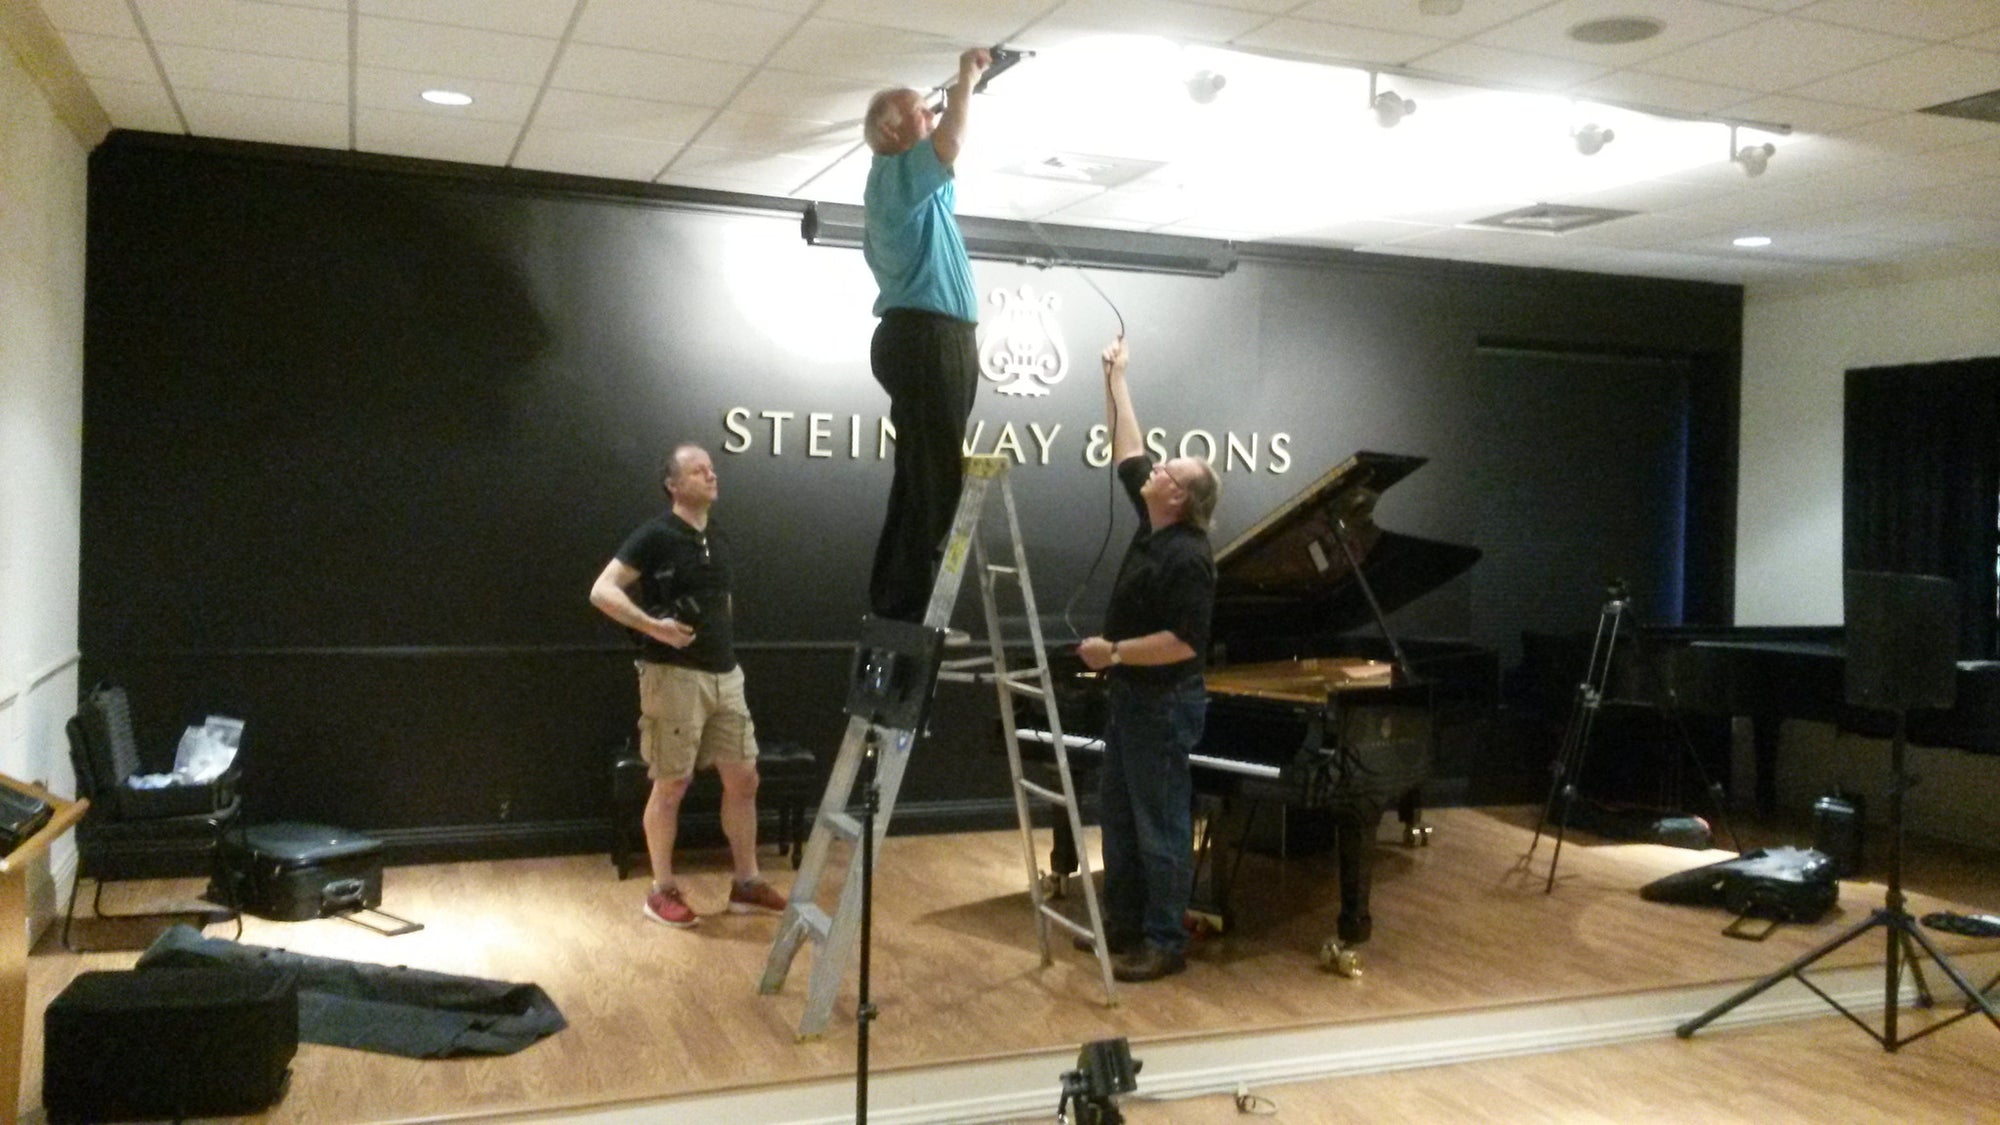 ALZO & Drew Henderson Produced a Piano Performance at the Steinway Galleries in Westport, CT